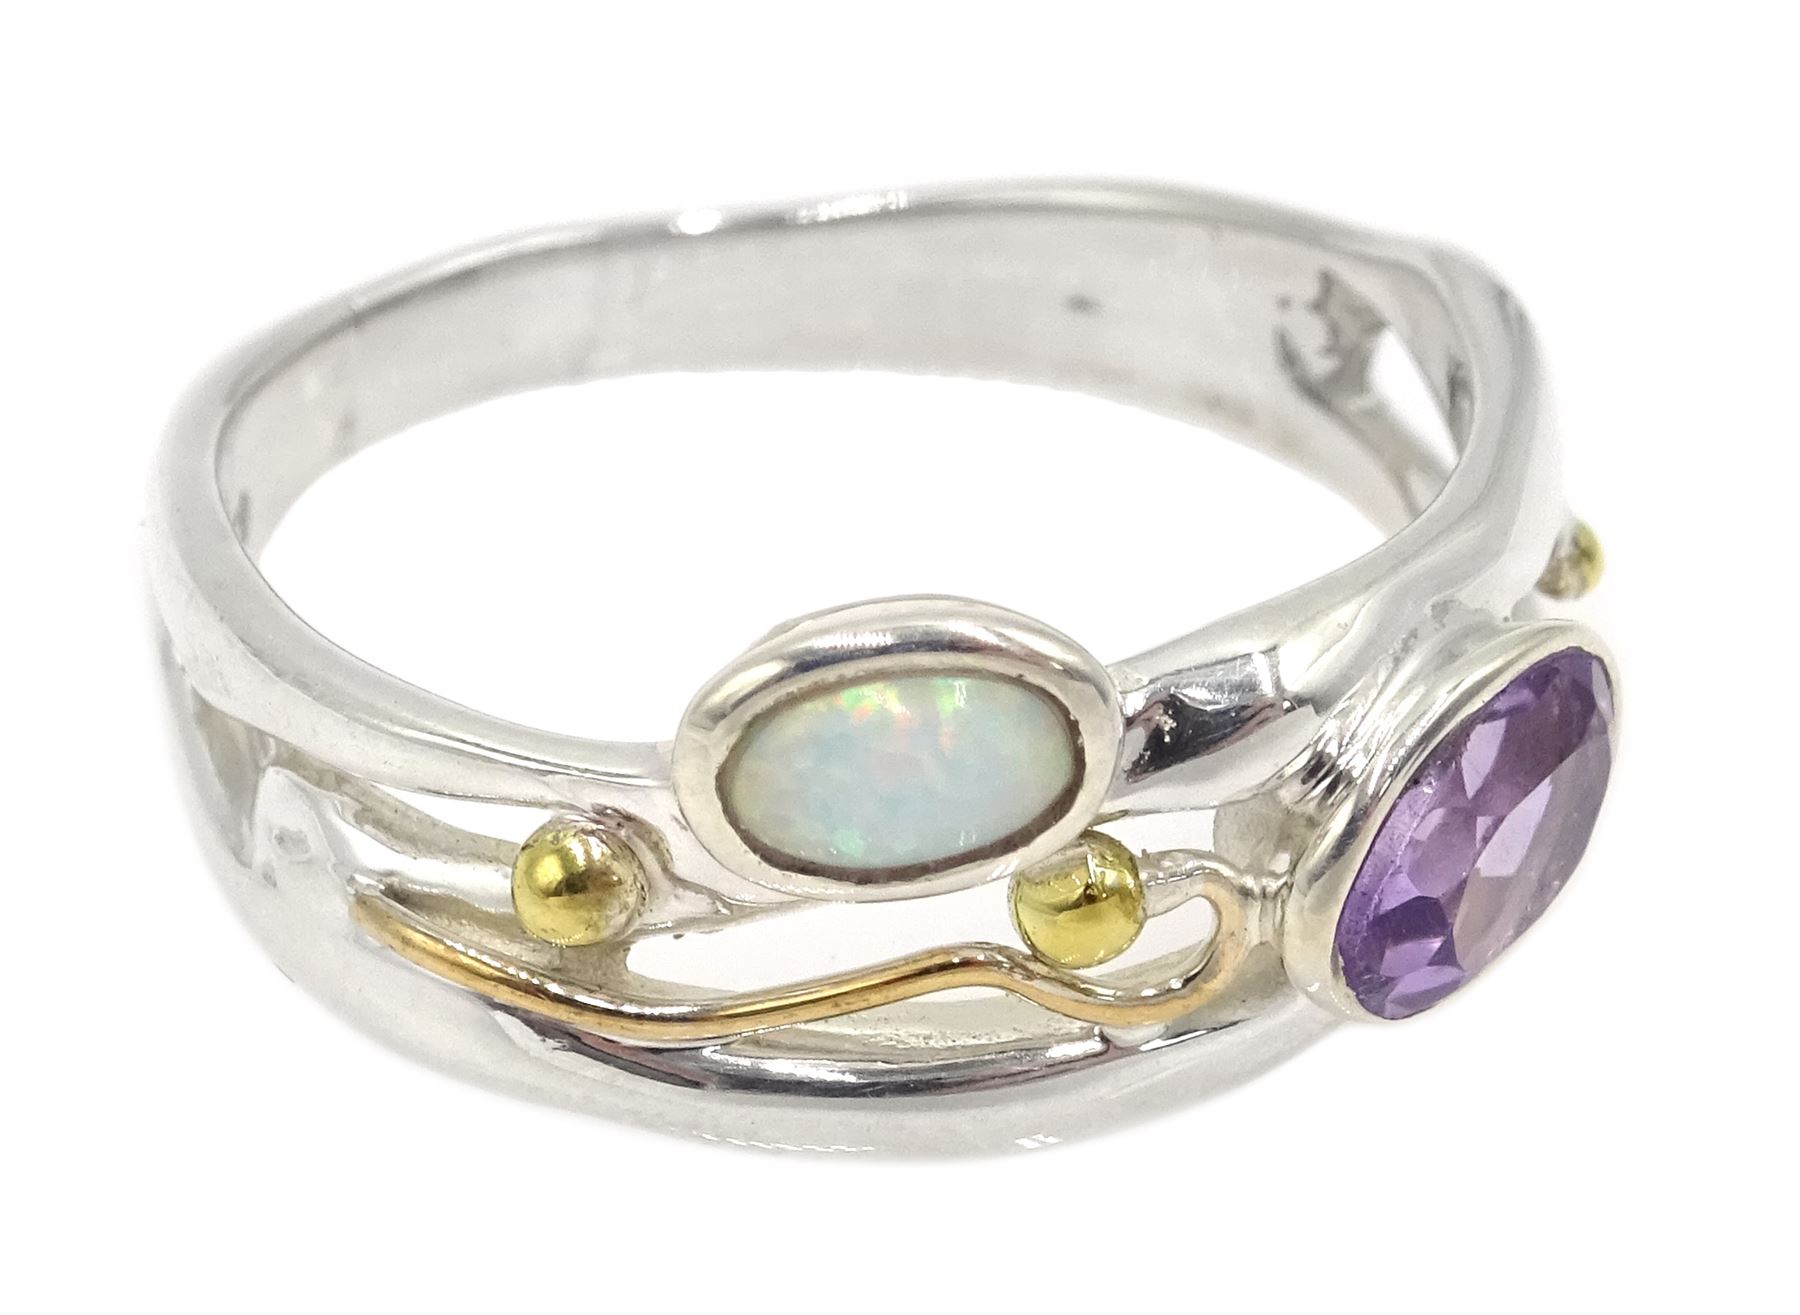 Silver and 14ct gold wire amethyst and opal ring - Image 4 of 7